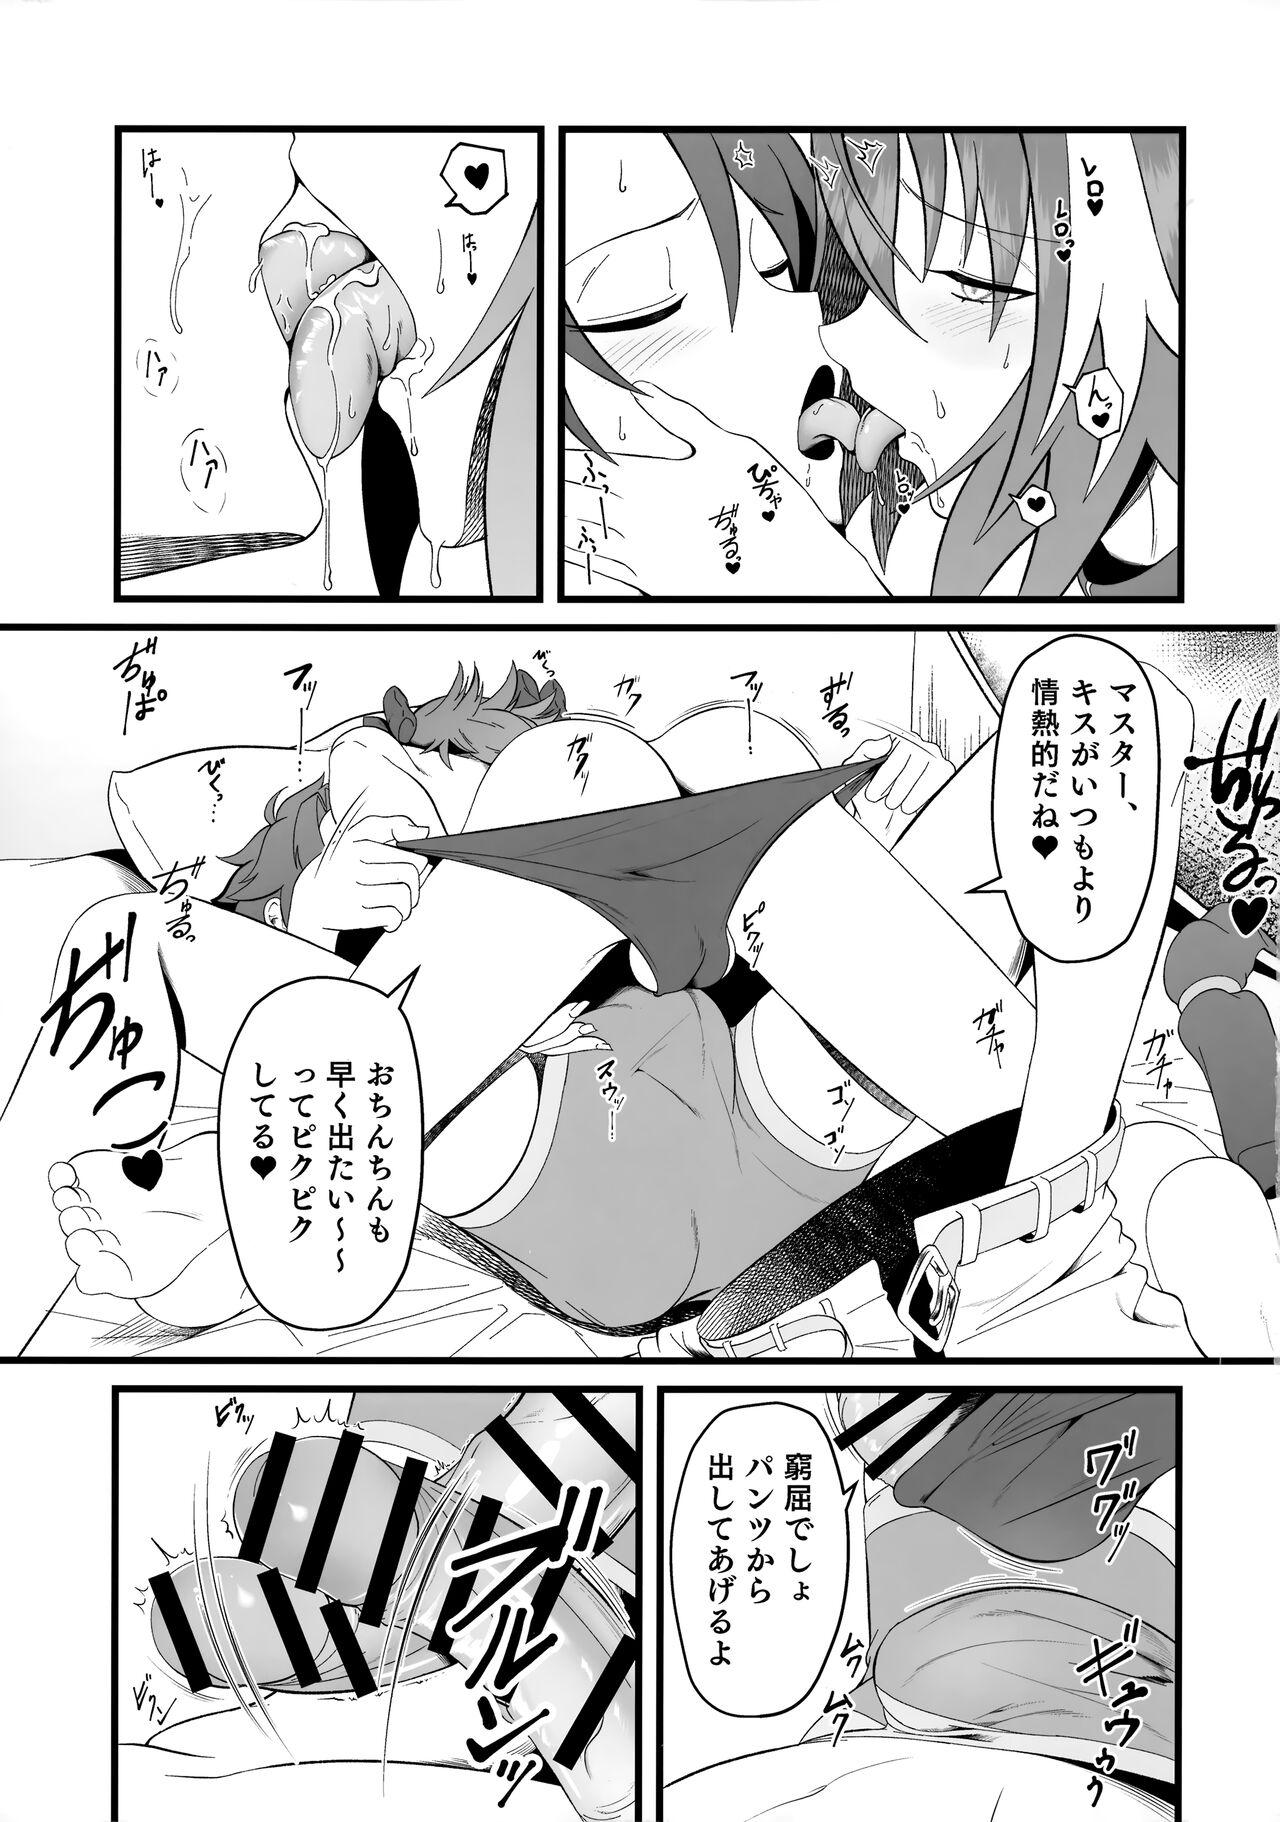 Animated Kimi no Ichiban ni Naritakute - I wanted to be your number one. - Fate grand order Clothed - Page 10